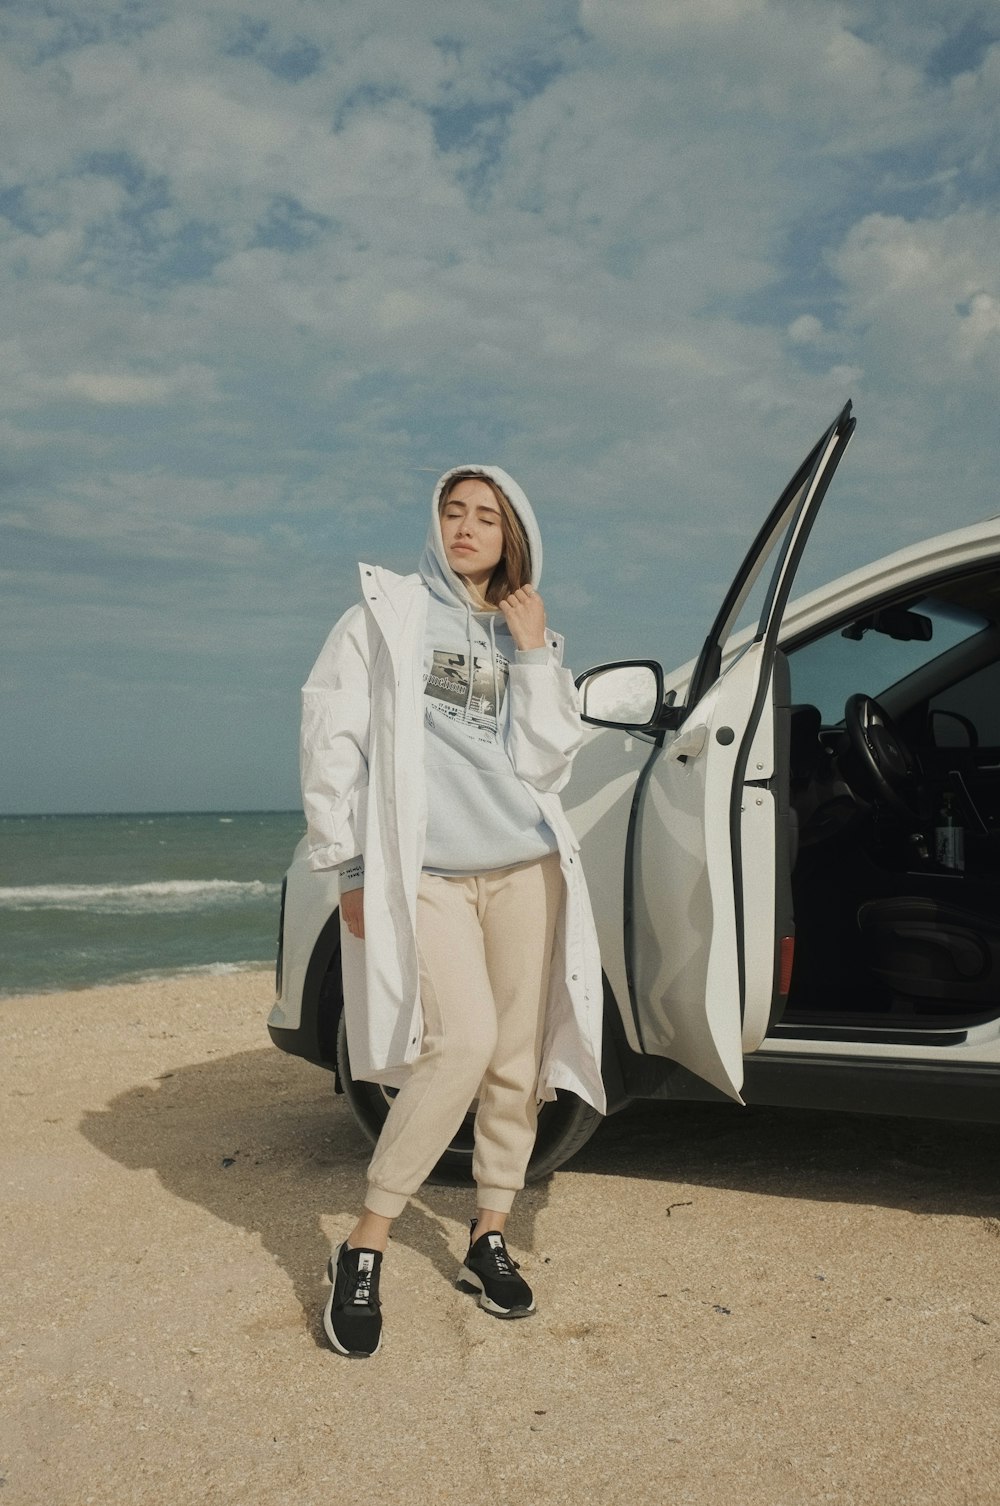 a man in a white coat standing next to a car on a beach